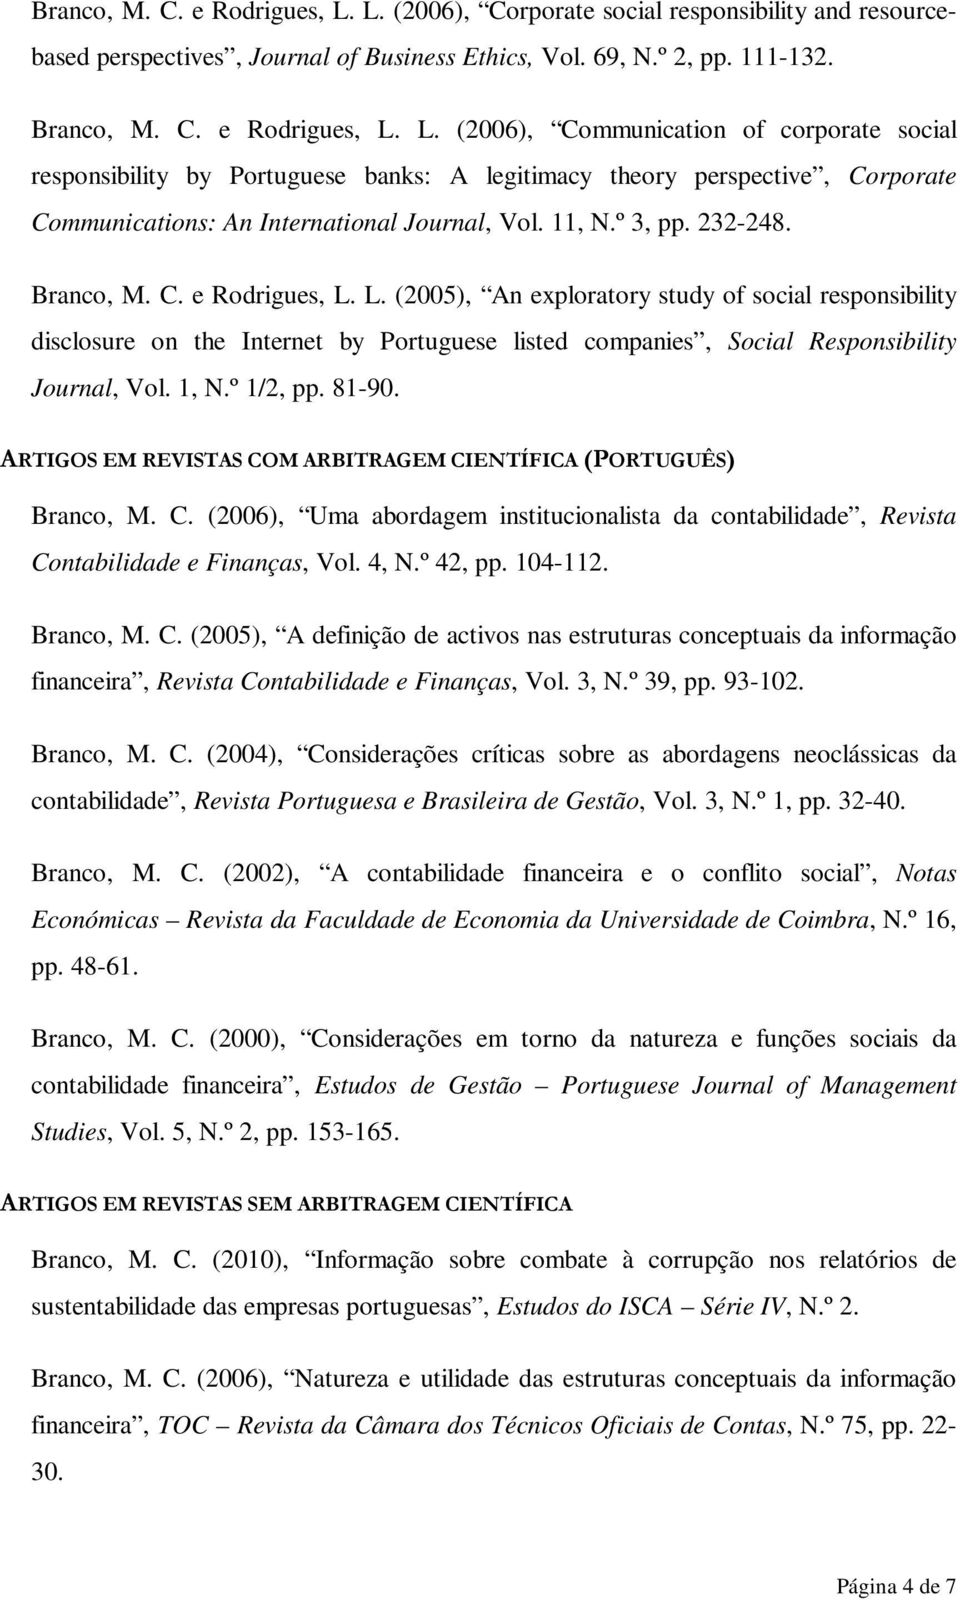 L. (2005), An exploratory study of social responsibility disclosure on the Internet by Portuguese listed companies, Social Responsibility Journal, Vol. 1, N.º 1/2, pp. 81-90.